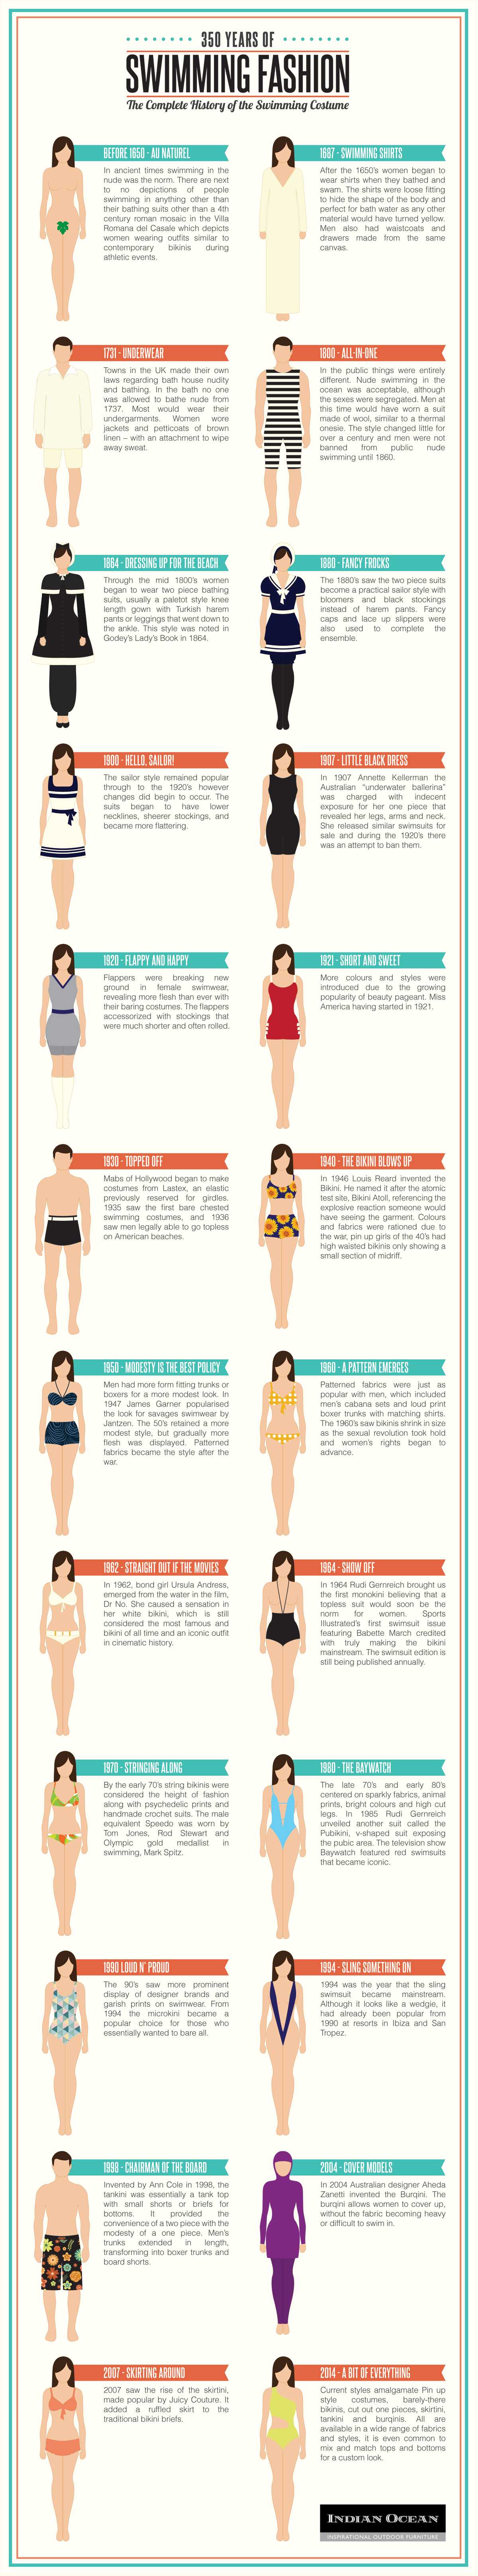 The Complete History Of The Swimming Costume Infographic